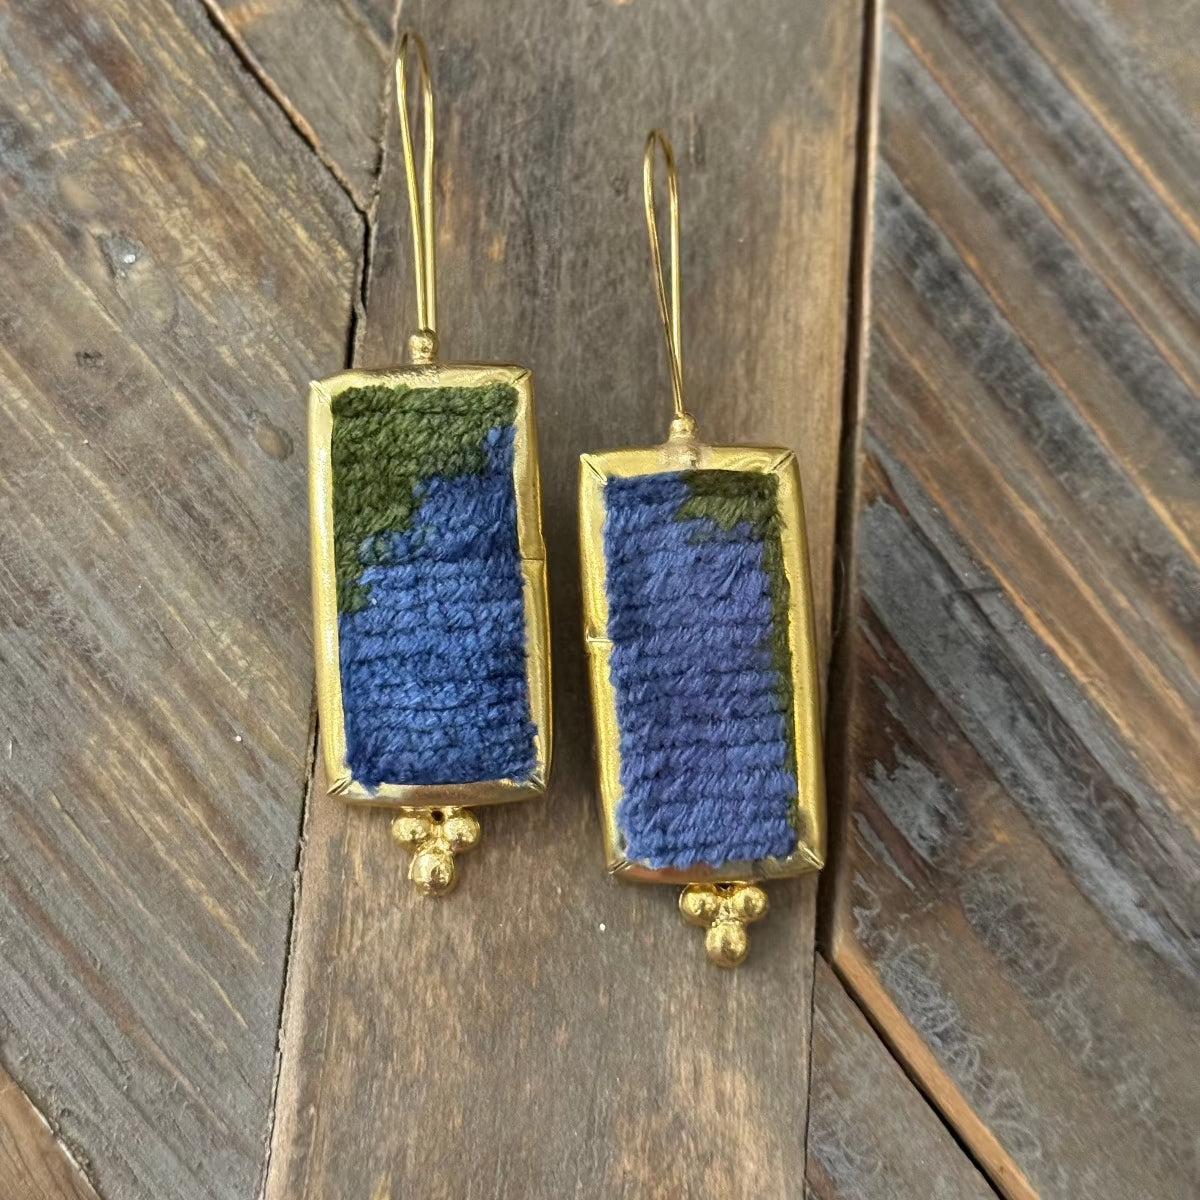 Hand Crafted Ottoman Vintage Textile Earrings - Rectangle New Jewelry Eyup Gunduz D 